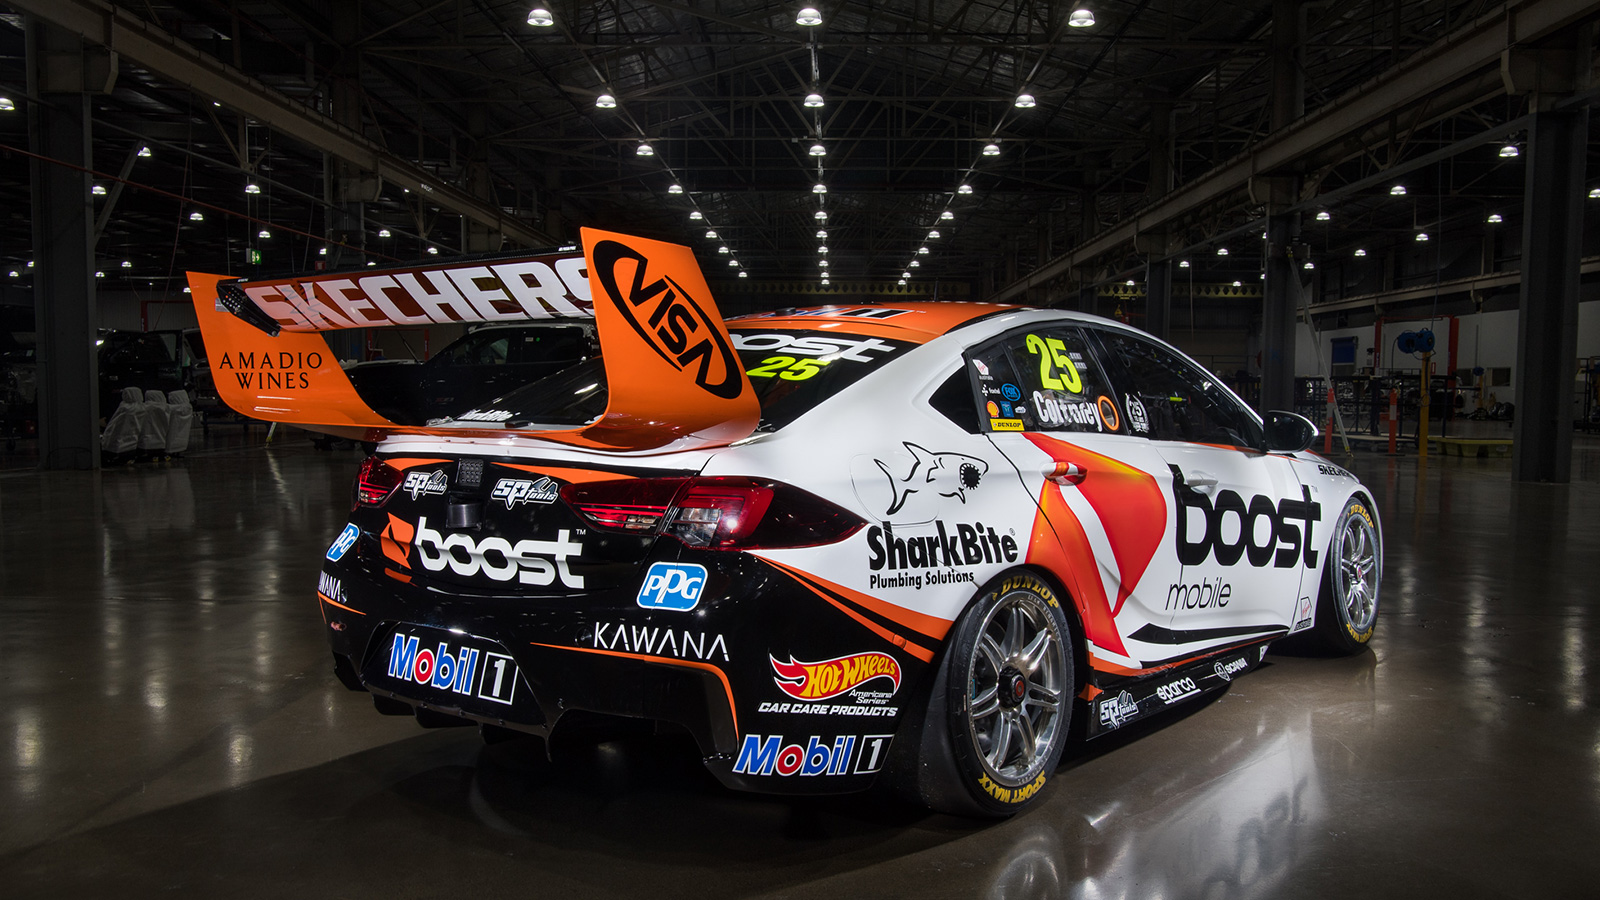 The team will have a fresh livery for Townsville.